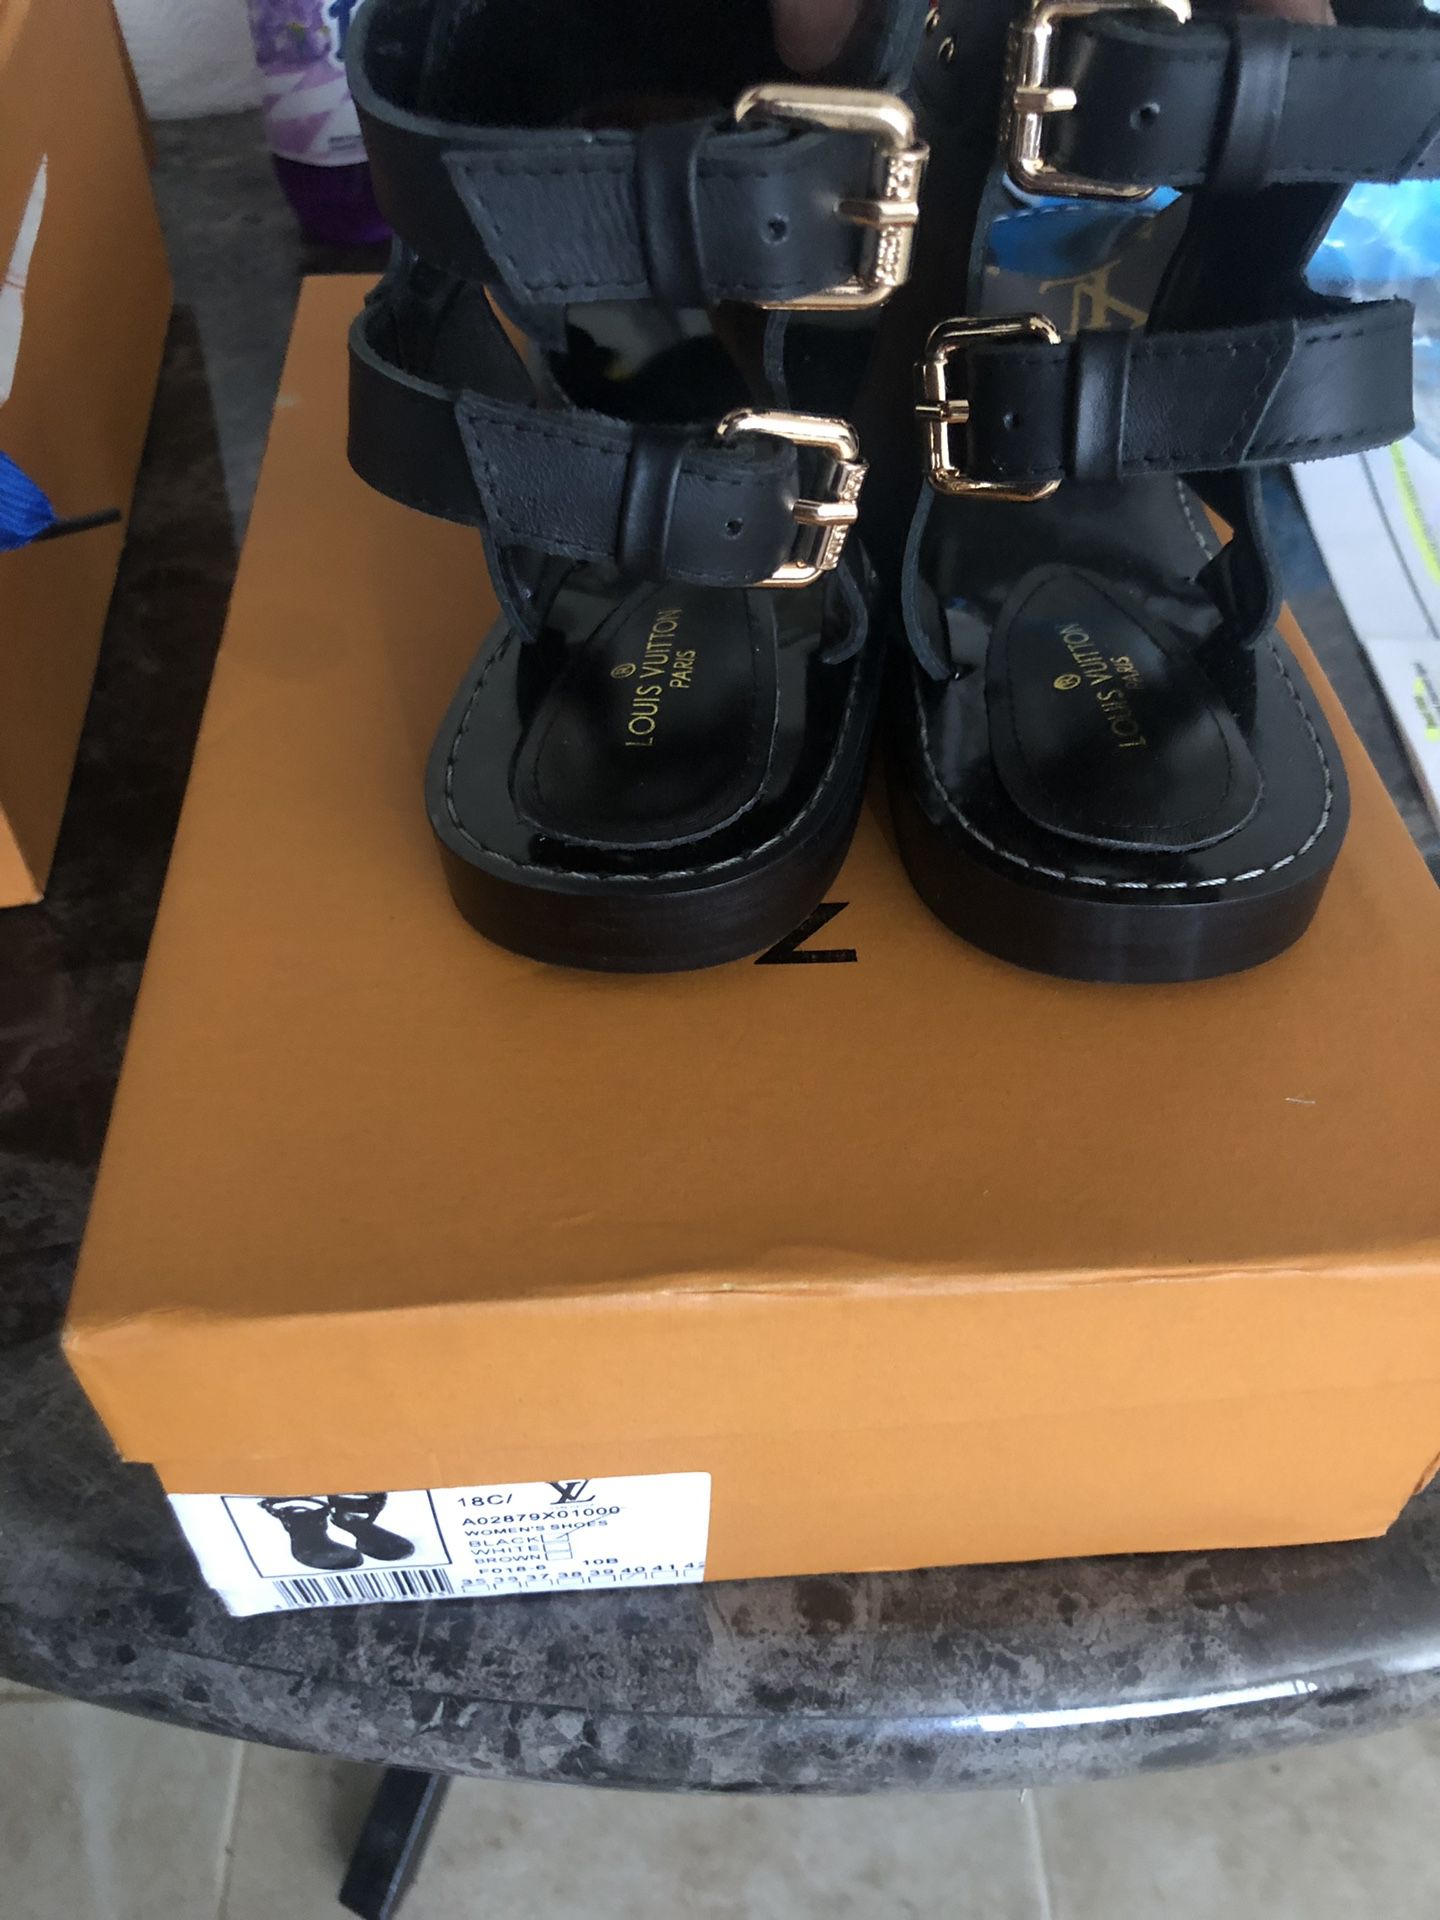 Louis Vuitton nomad sandal size 8 for Sale in Brooklyn, NY - OfferUp